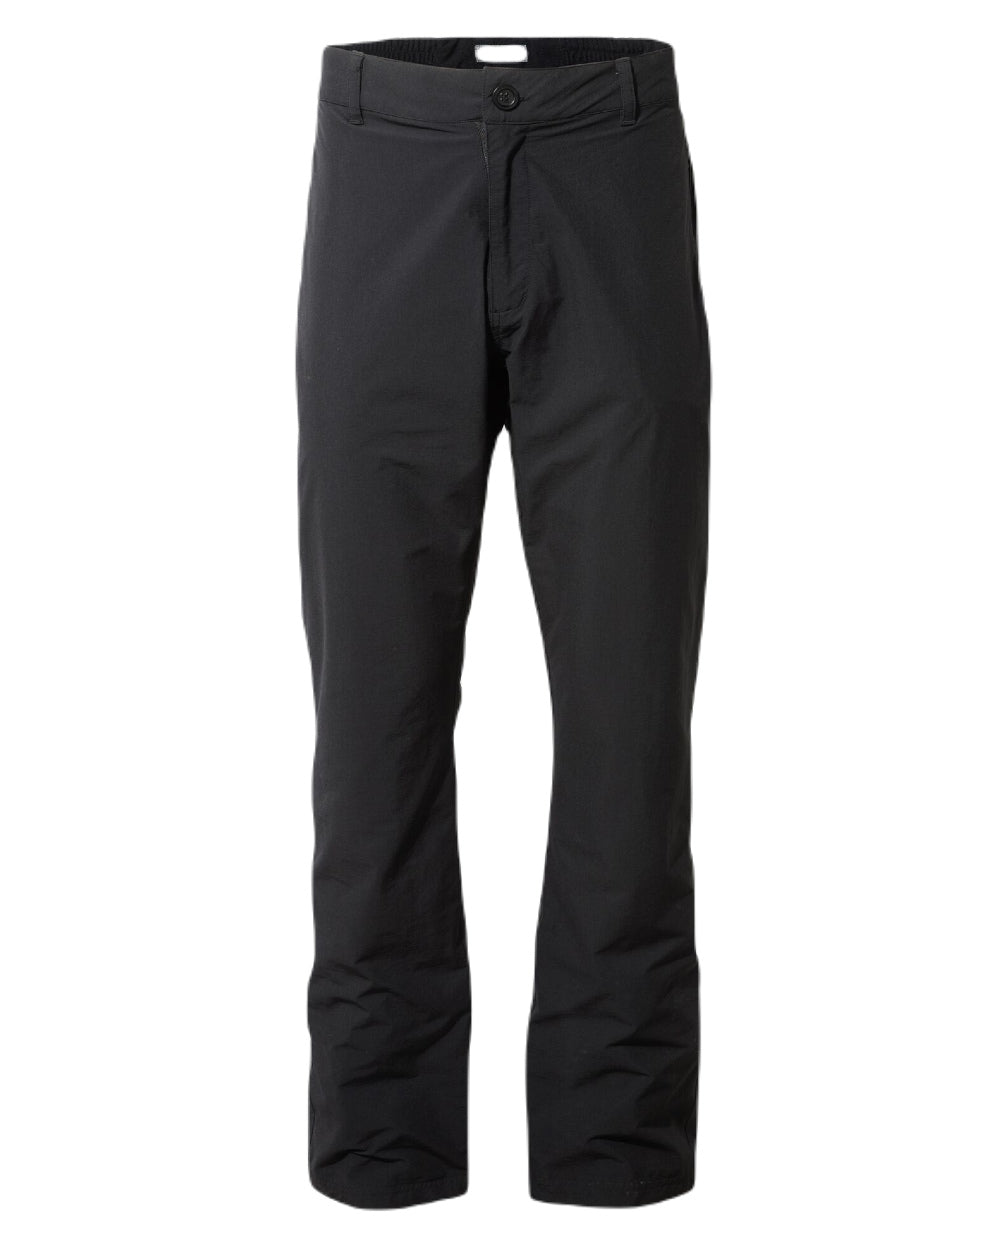 Black Coloured Craghoppers Mens Kiwi Pro II Waterproof Trousers On A White Background 